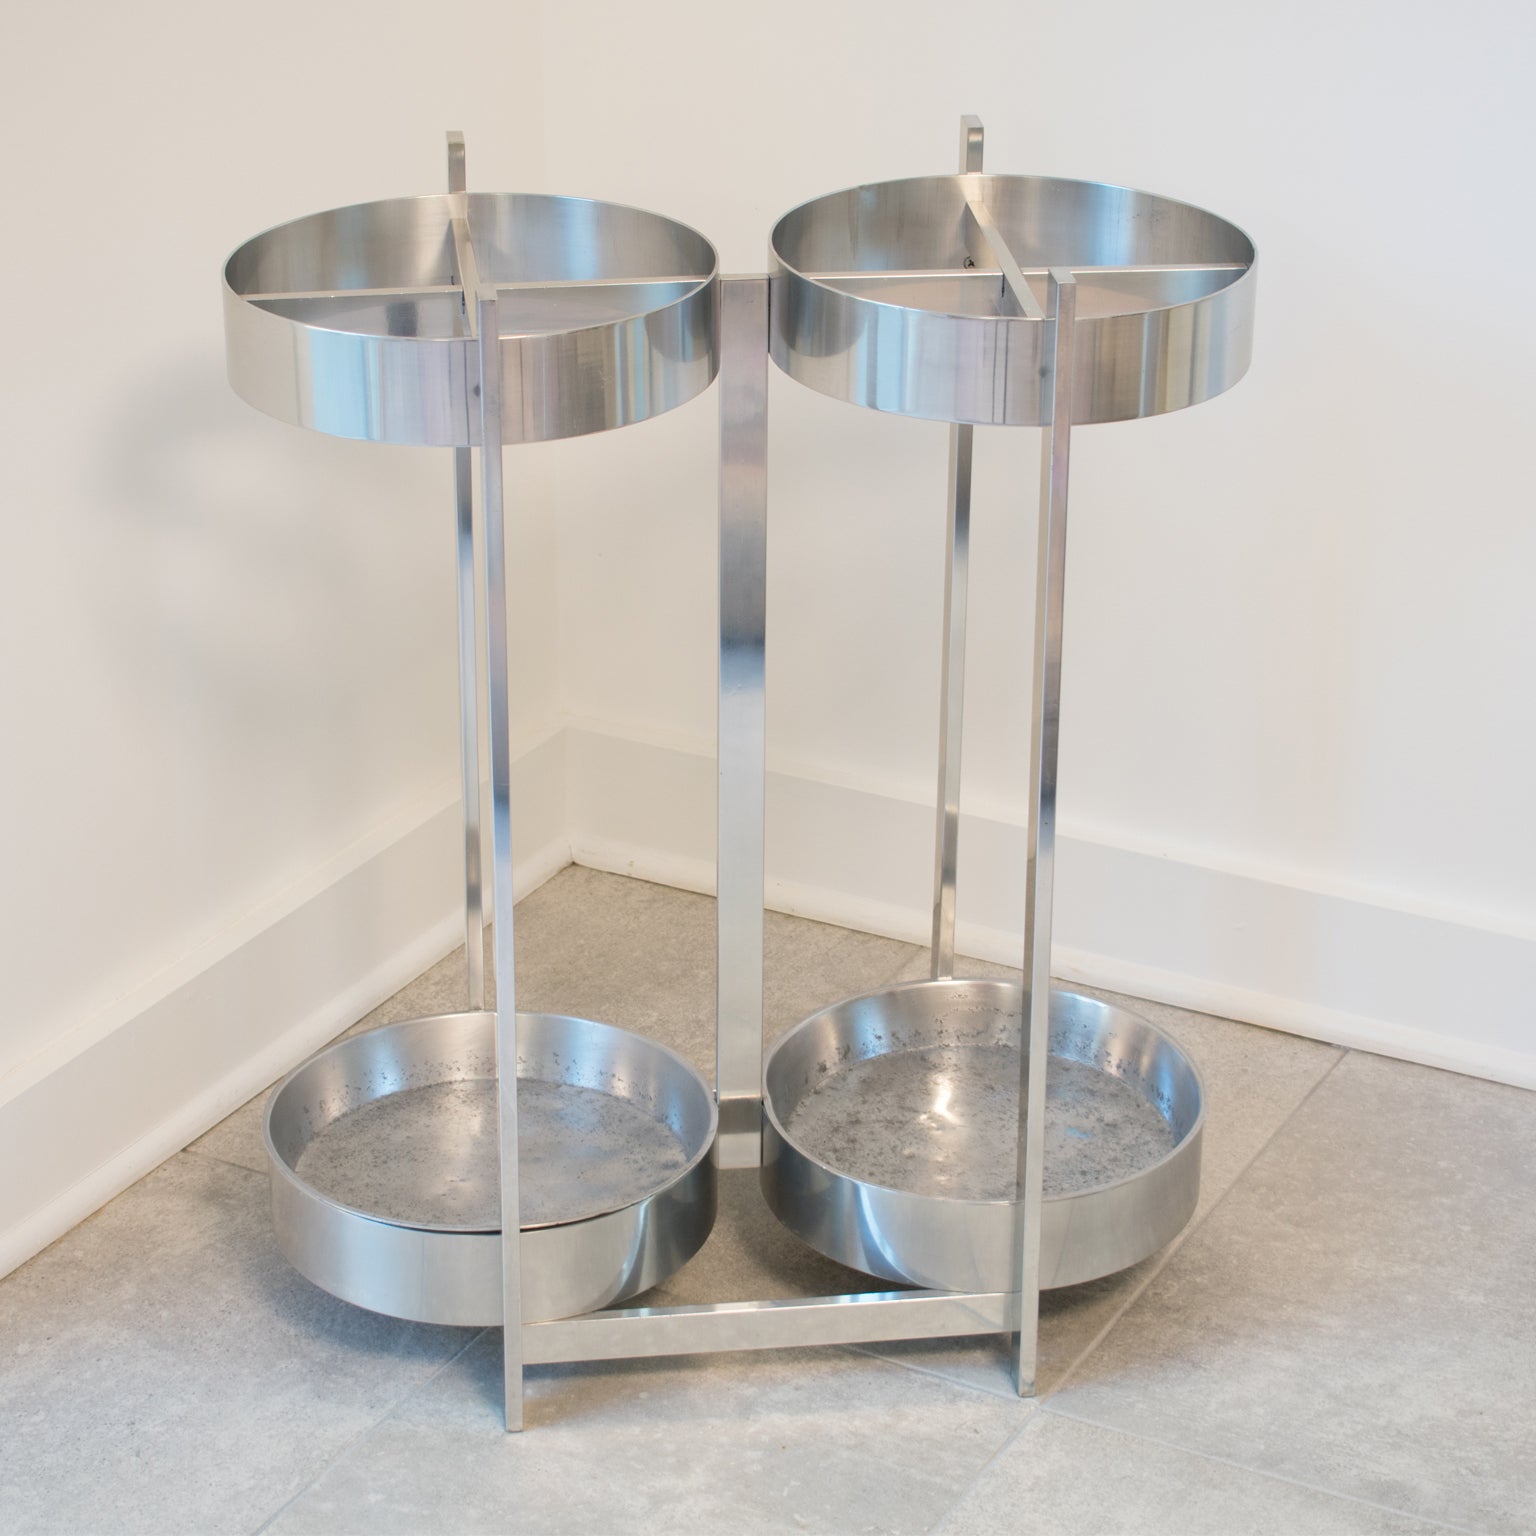 This elegant Mid-Century modernist aluminum umbrella stand or holder features an industrial Machine Age design with a large double round shape and removable inserts. There is no visible maker's mark.
This decorative accessory is in excellent